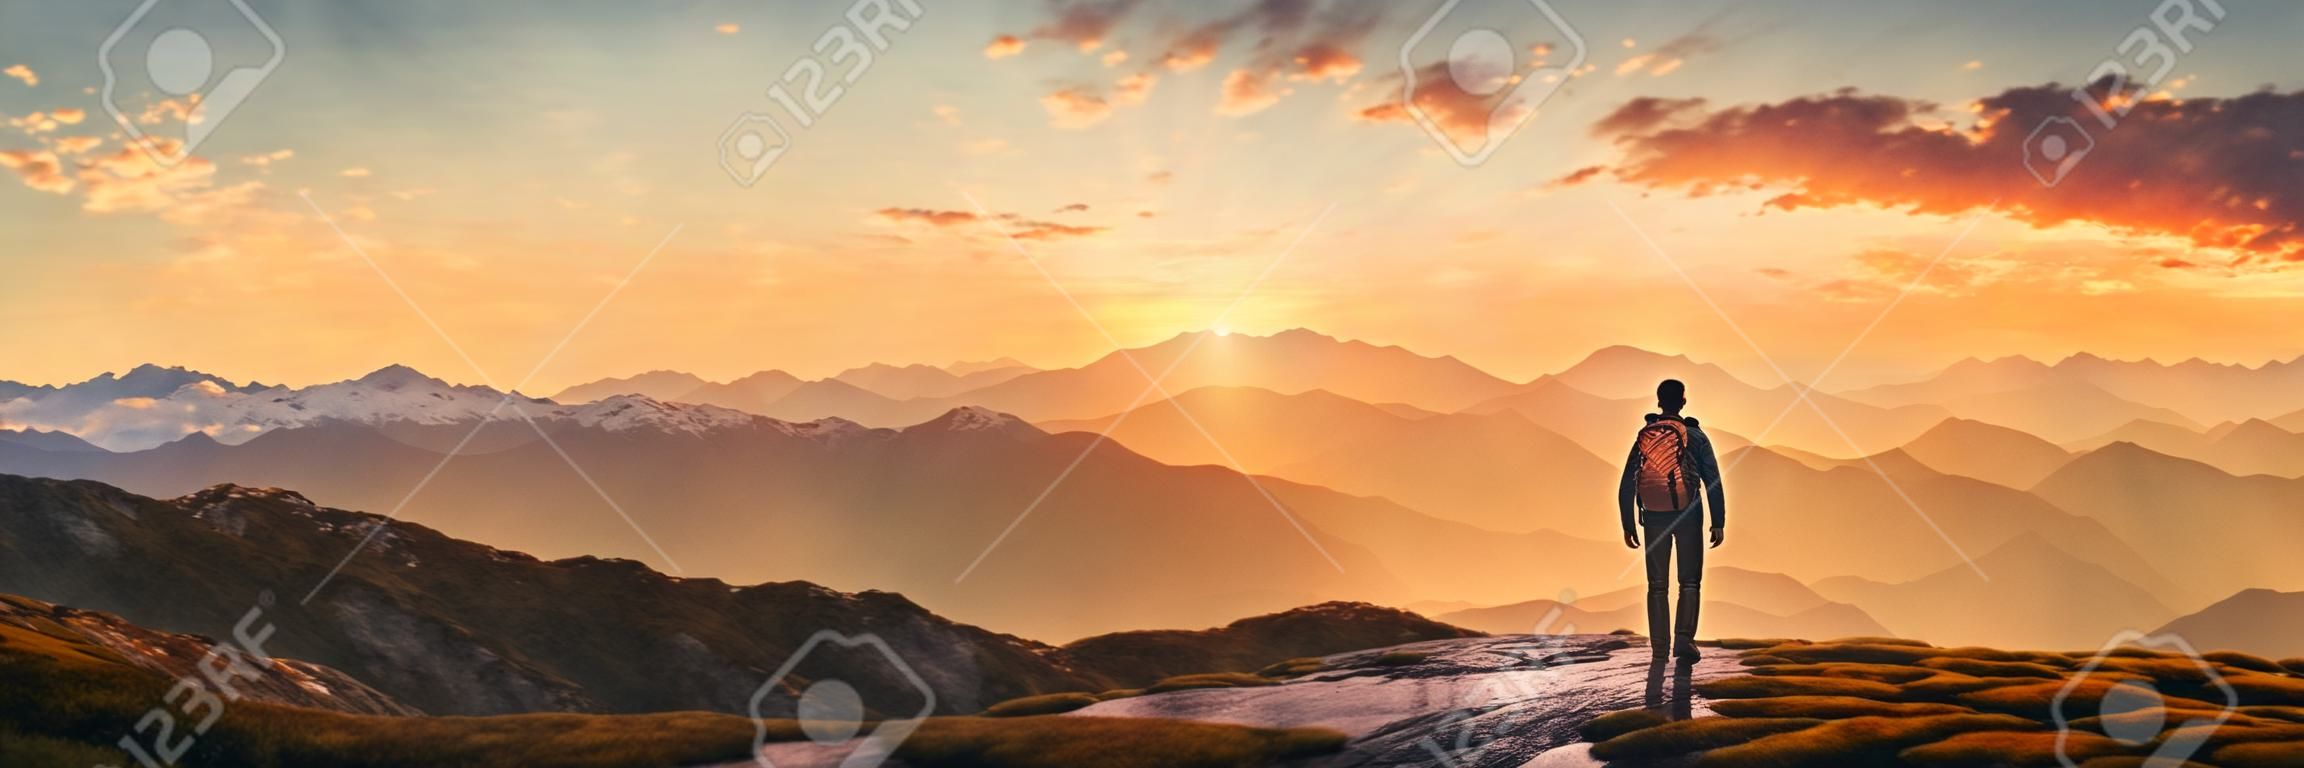 Hiker in the mountains at sunset. Panoramic view.